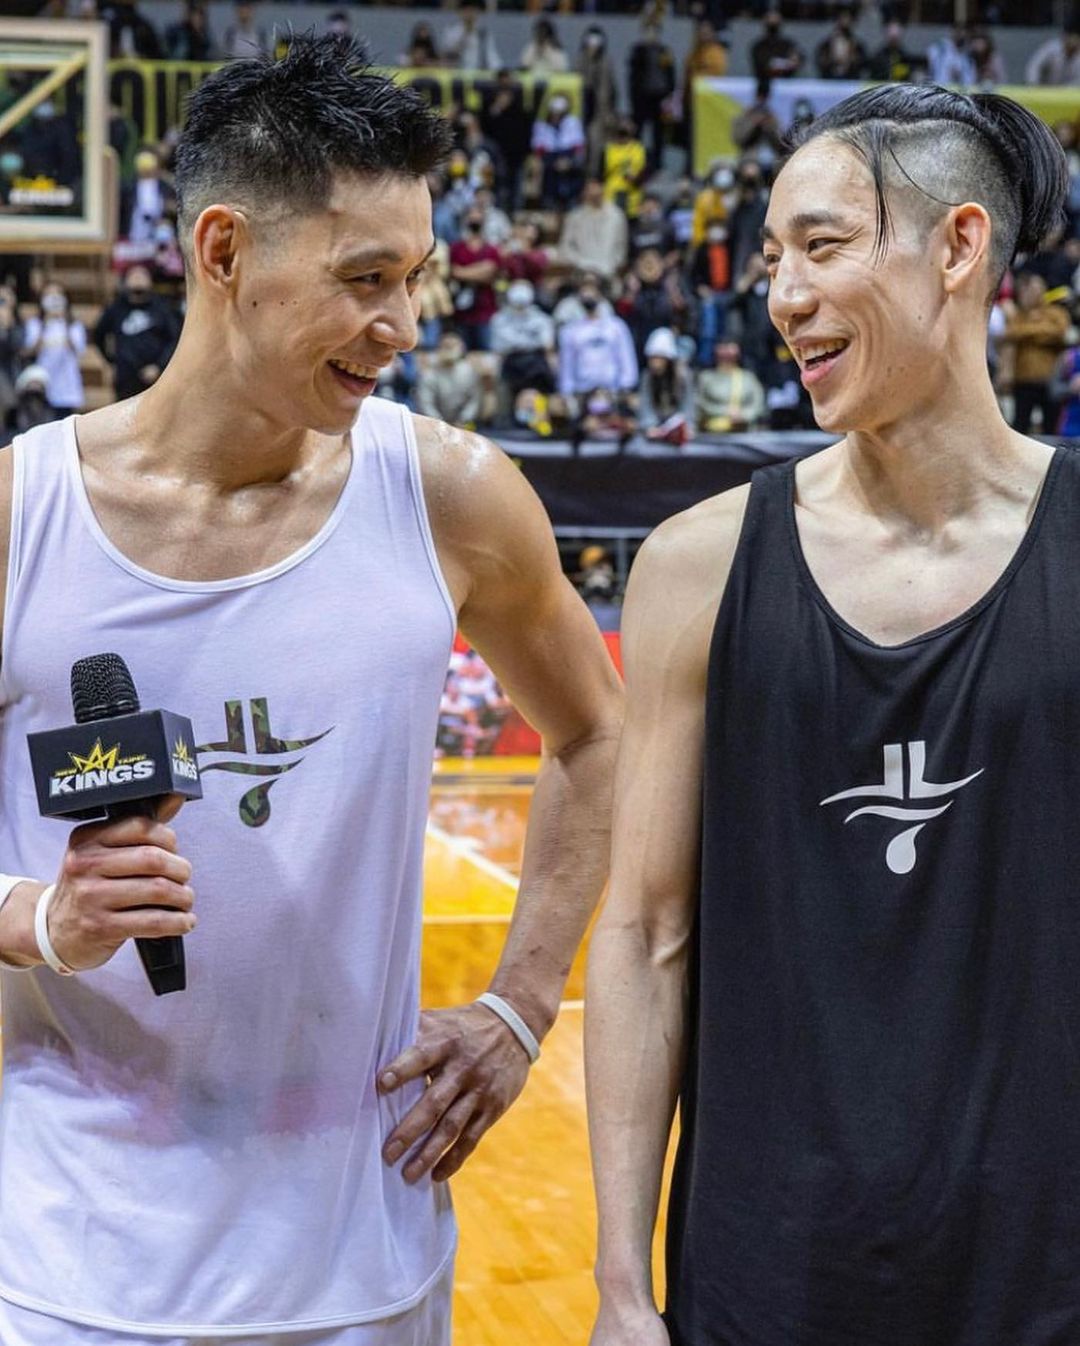 both jeremy lin and his brother joseph lin are interviewed at the basketball court